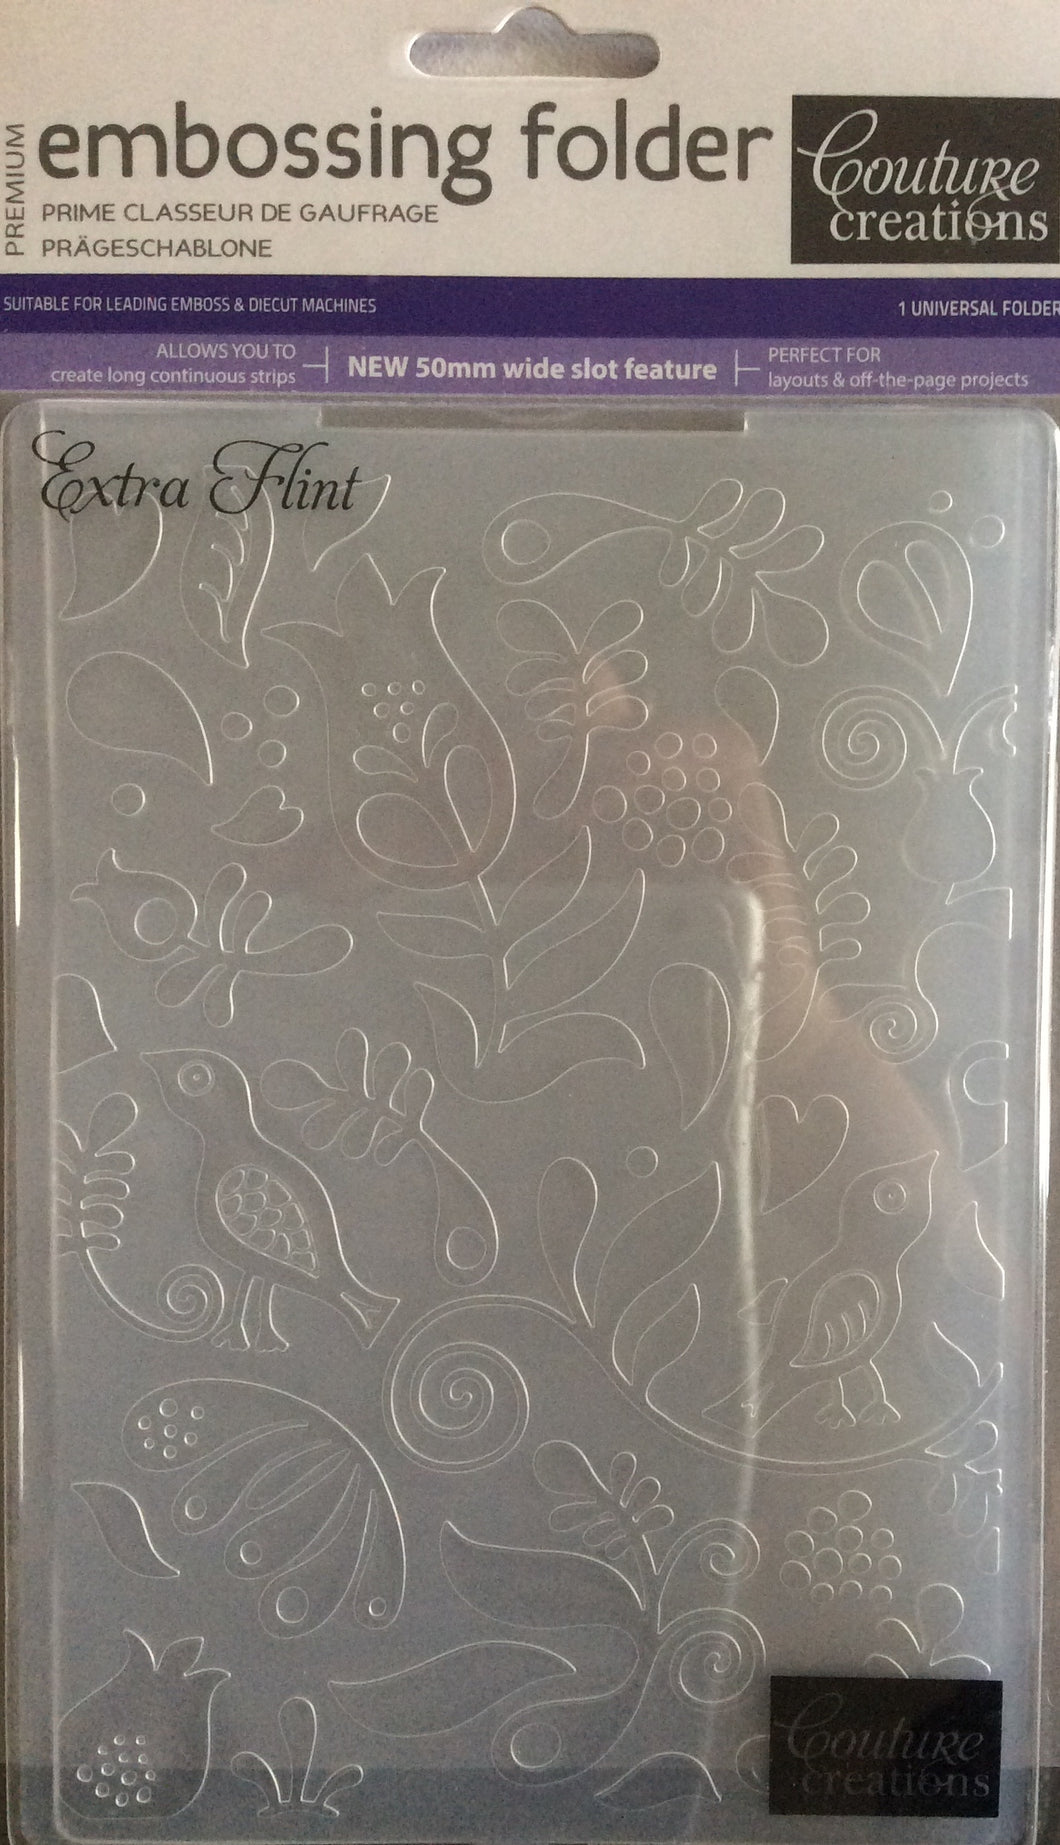 Couture Creations Embossing Folder - Fresh and Fun Collection: Extra Flint